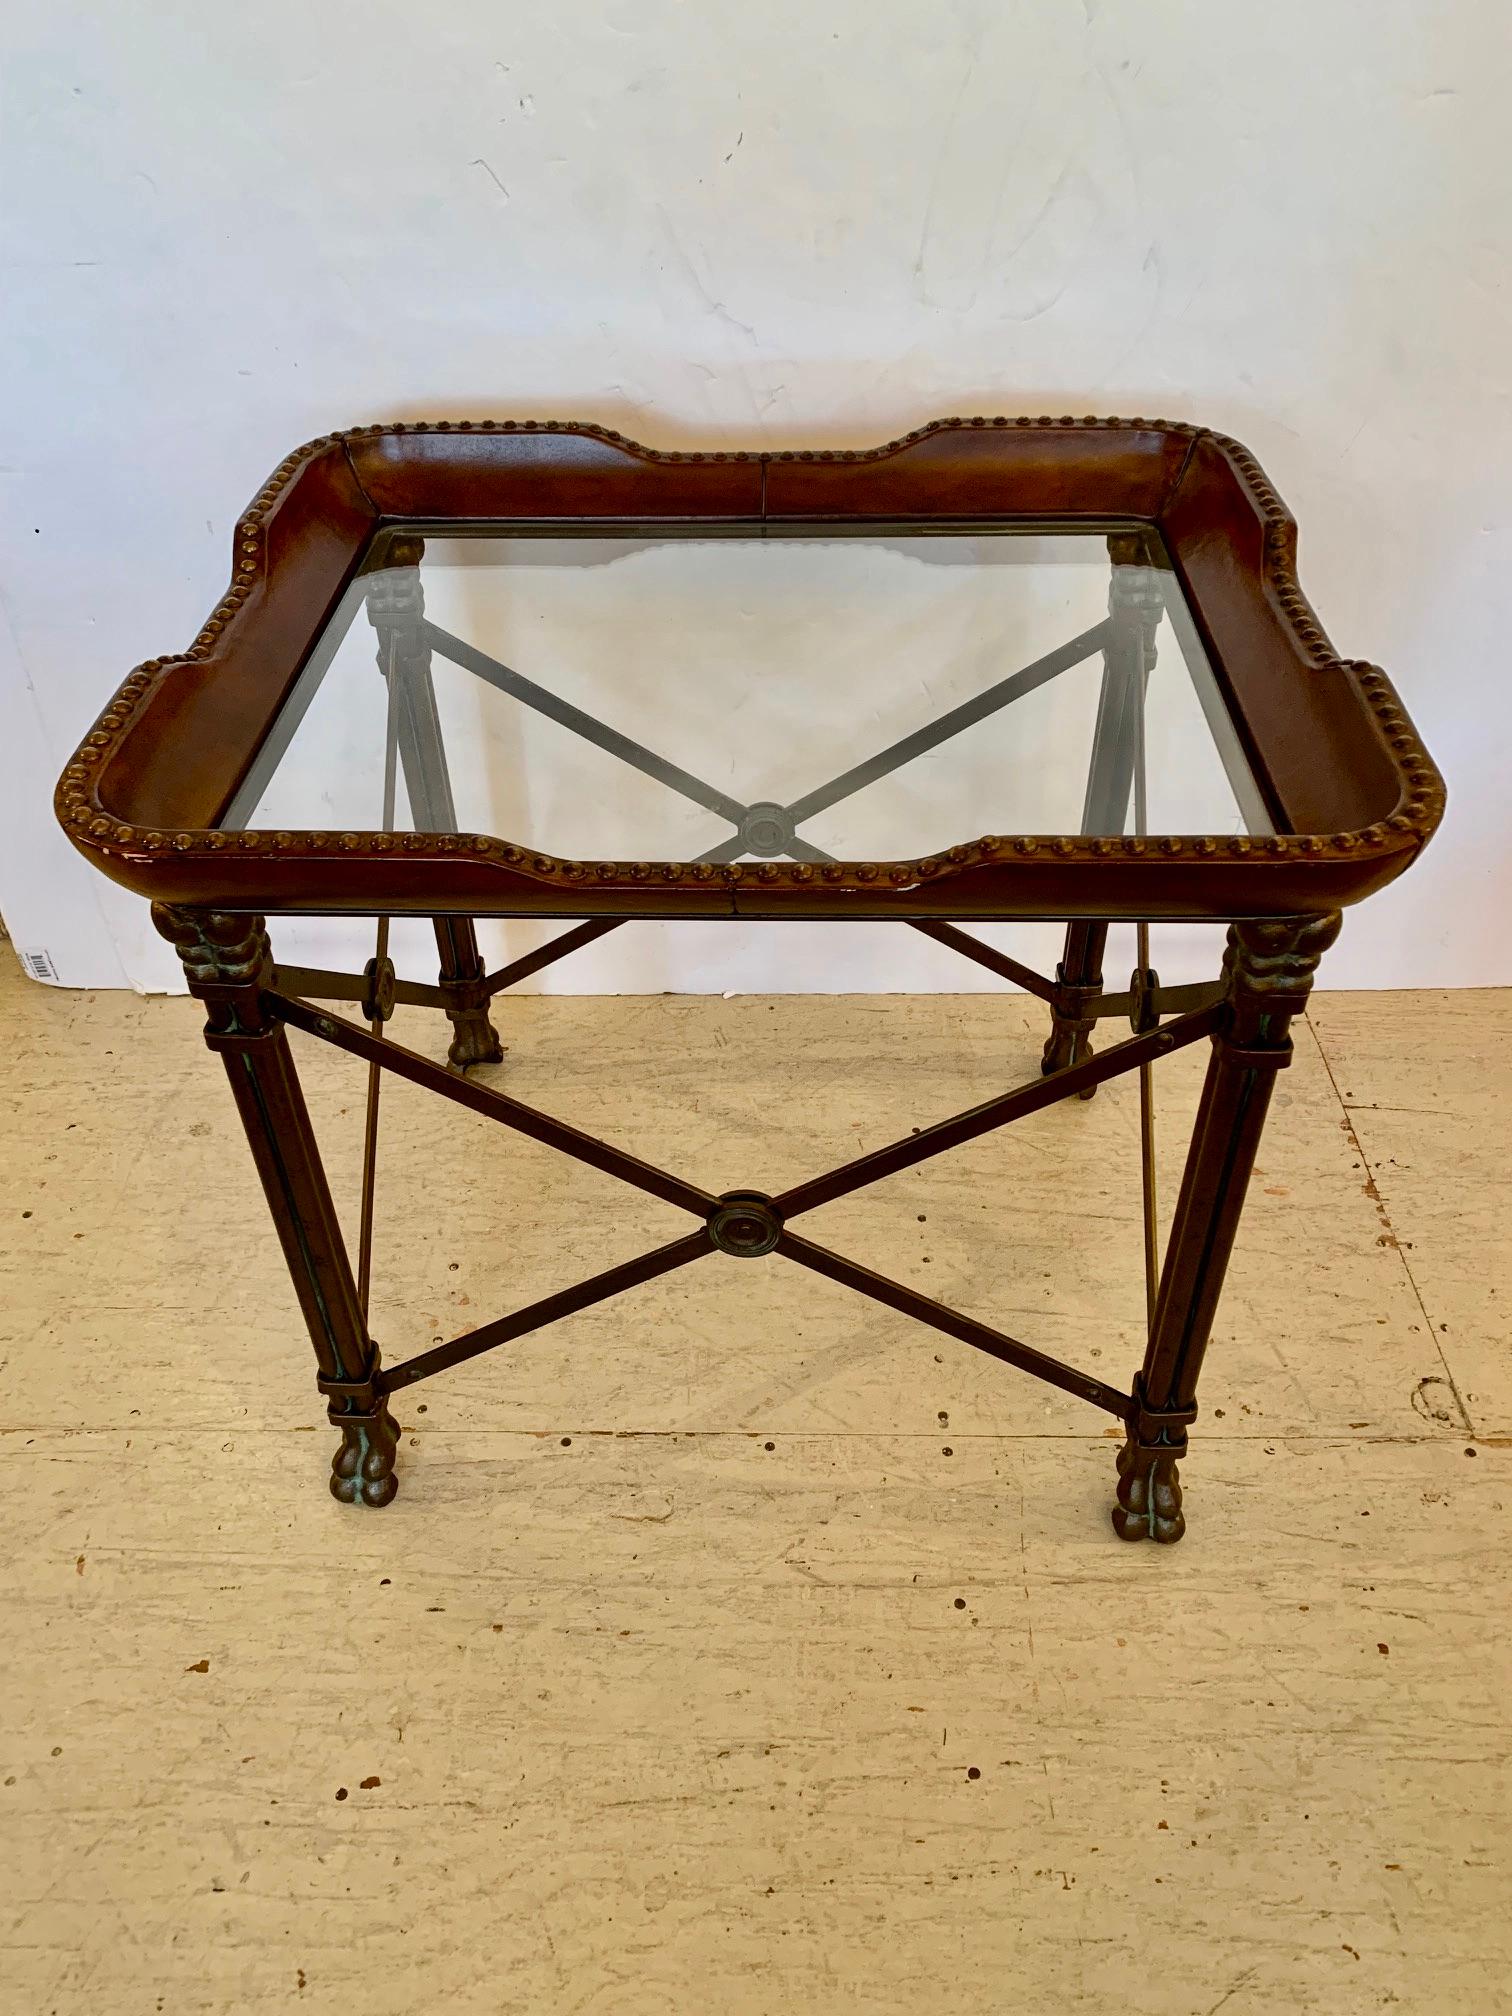 Handsome rectangular side or end table having tray shaped glass top with rich leather wrapped gallery finished with brass nailheads. The permanent top rests on iron campaign style base with stylish X's having central medallions.
Height of glass